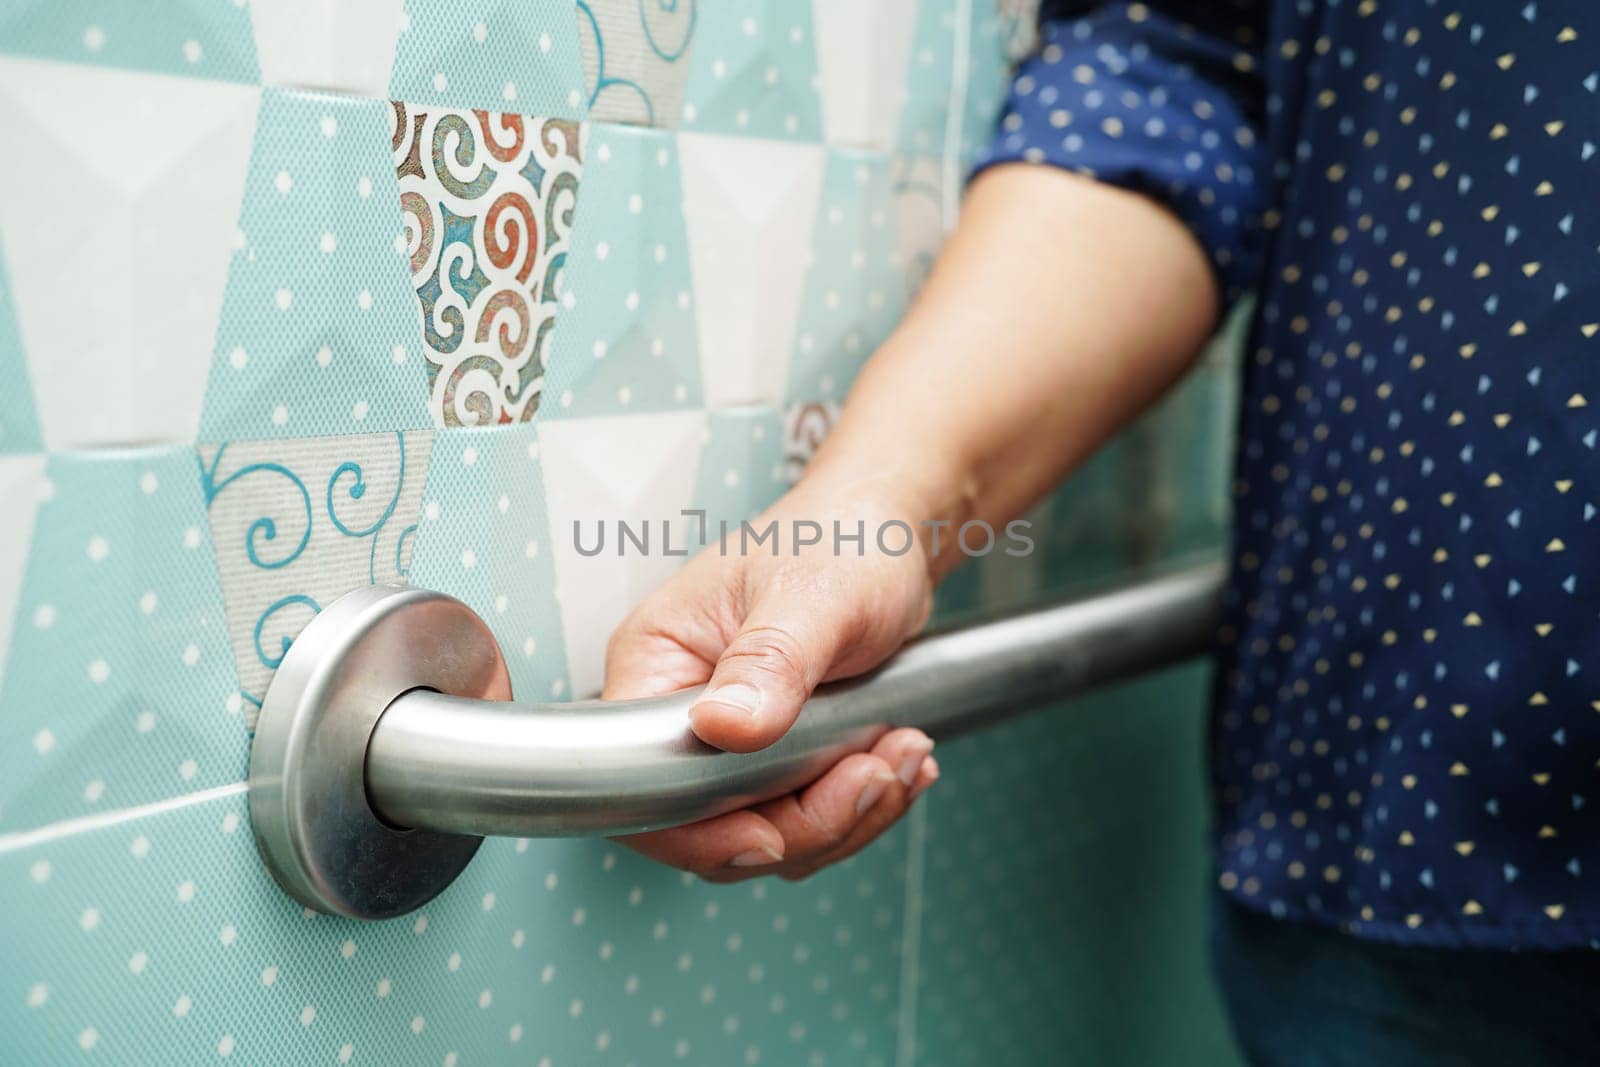 Asian woman patient use toilet support rail in bathroom, handrail safety grab bar, security in nursing hospital. by sweettomato